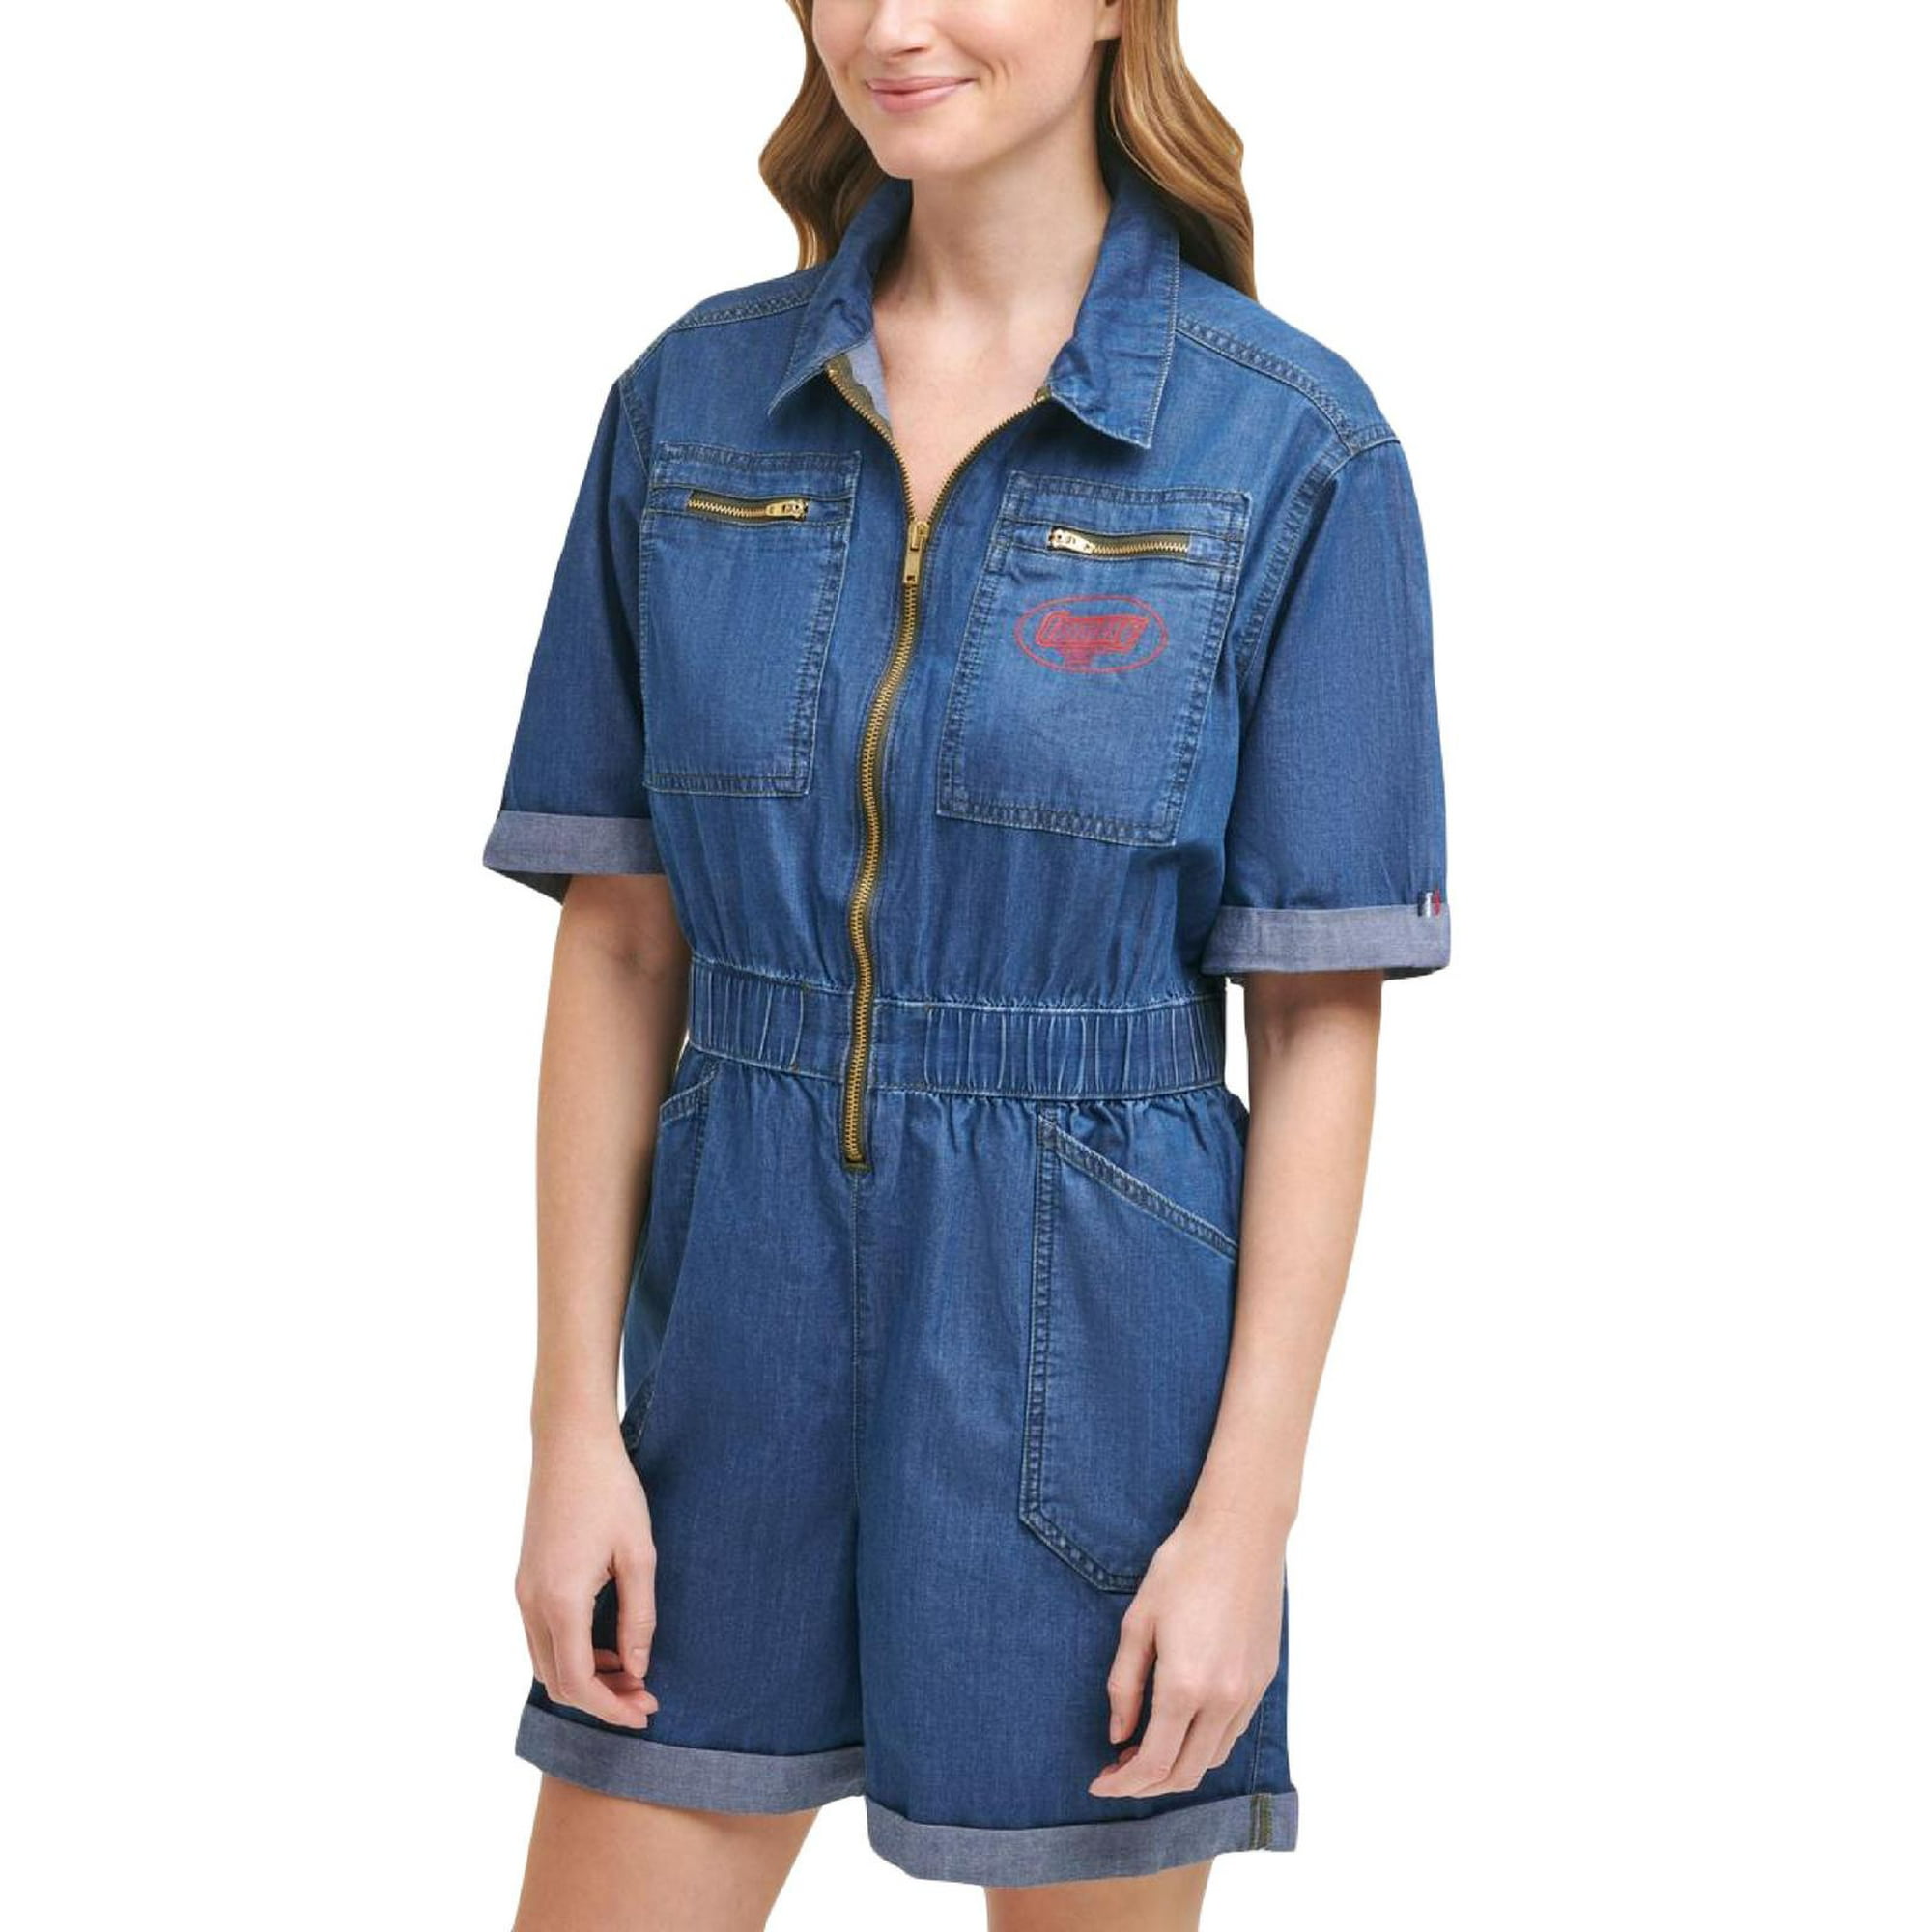 ego Intens Ooze Tommy Jeans Womens Smocked Collared Romper - Walmart.com